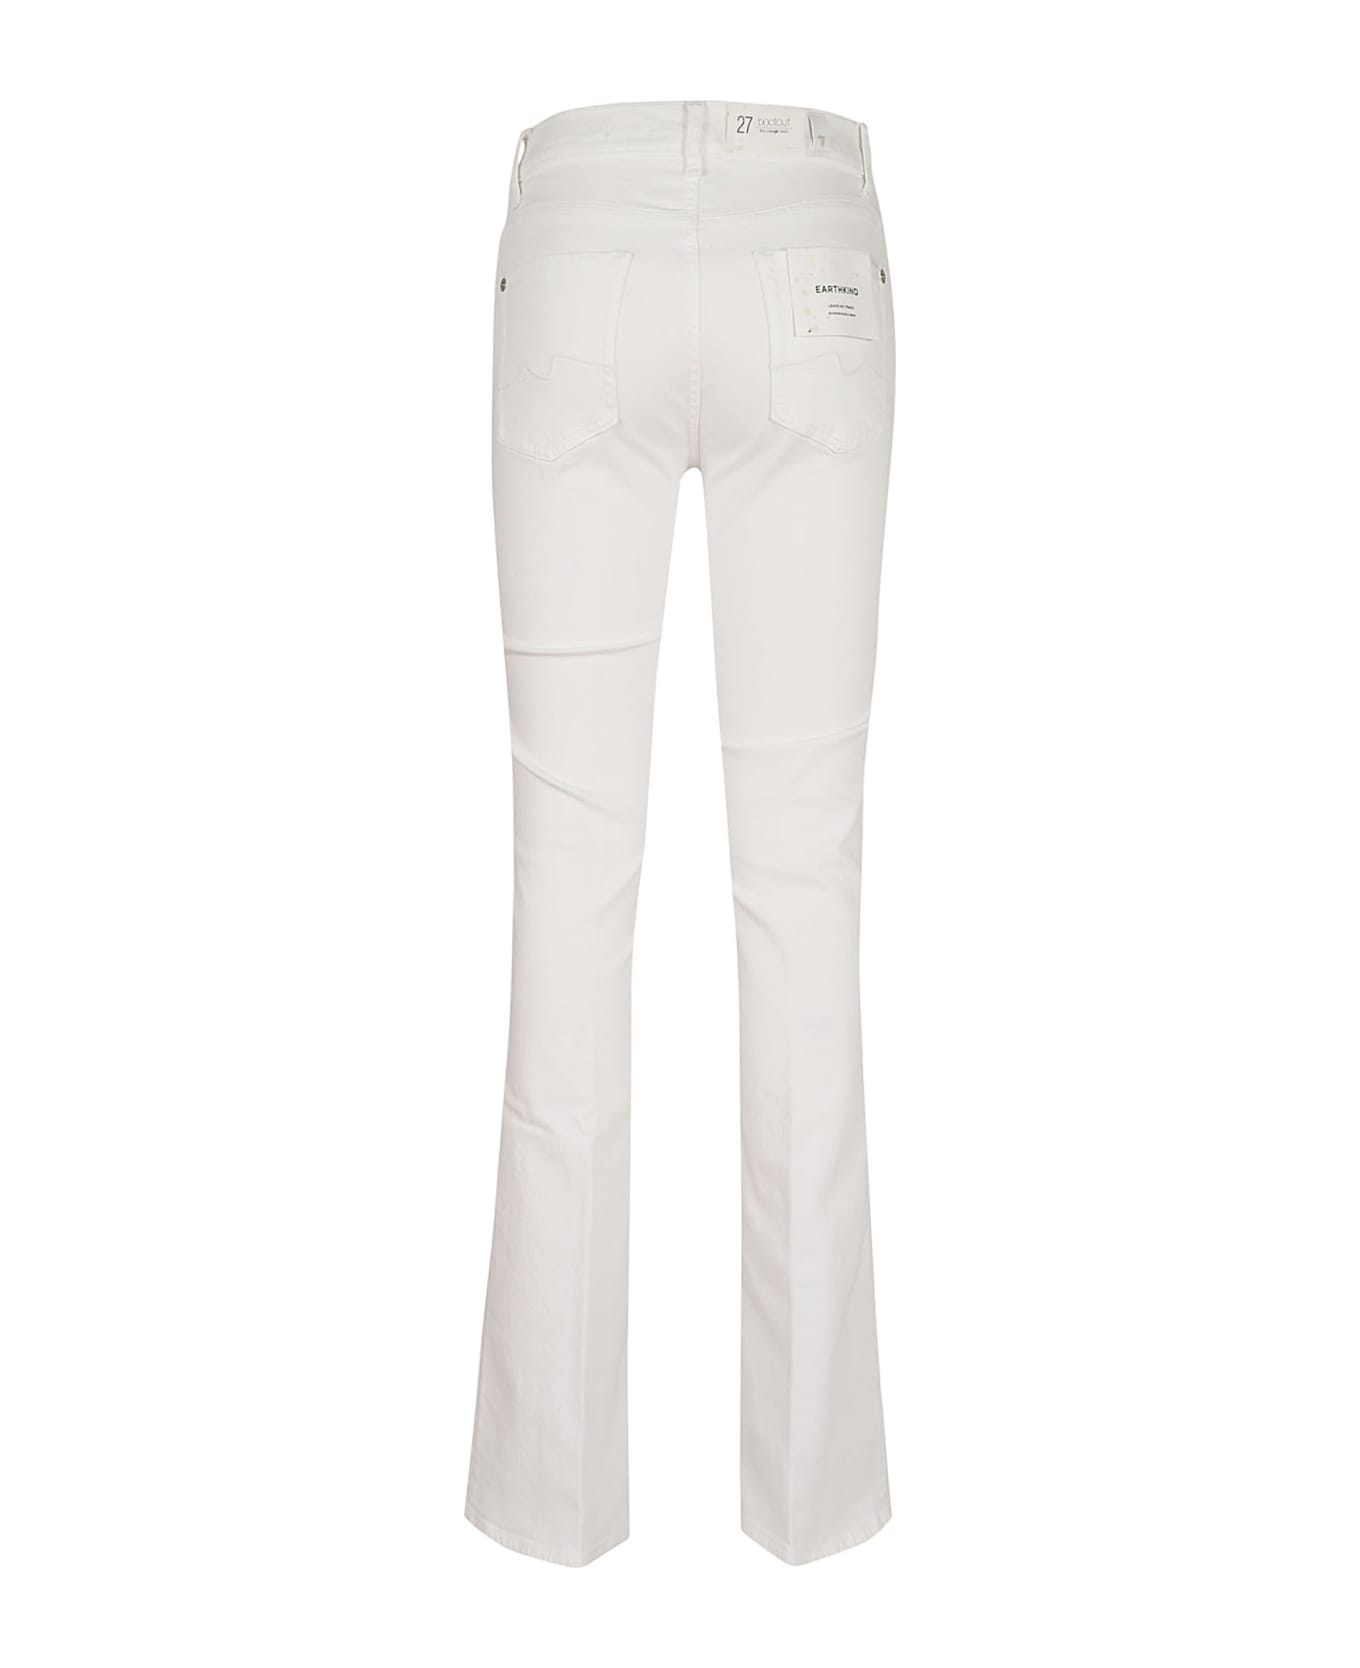 7 For All Mankind Bootcut Pure White - White ボトムス